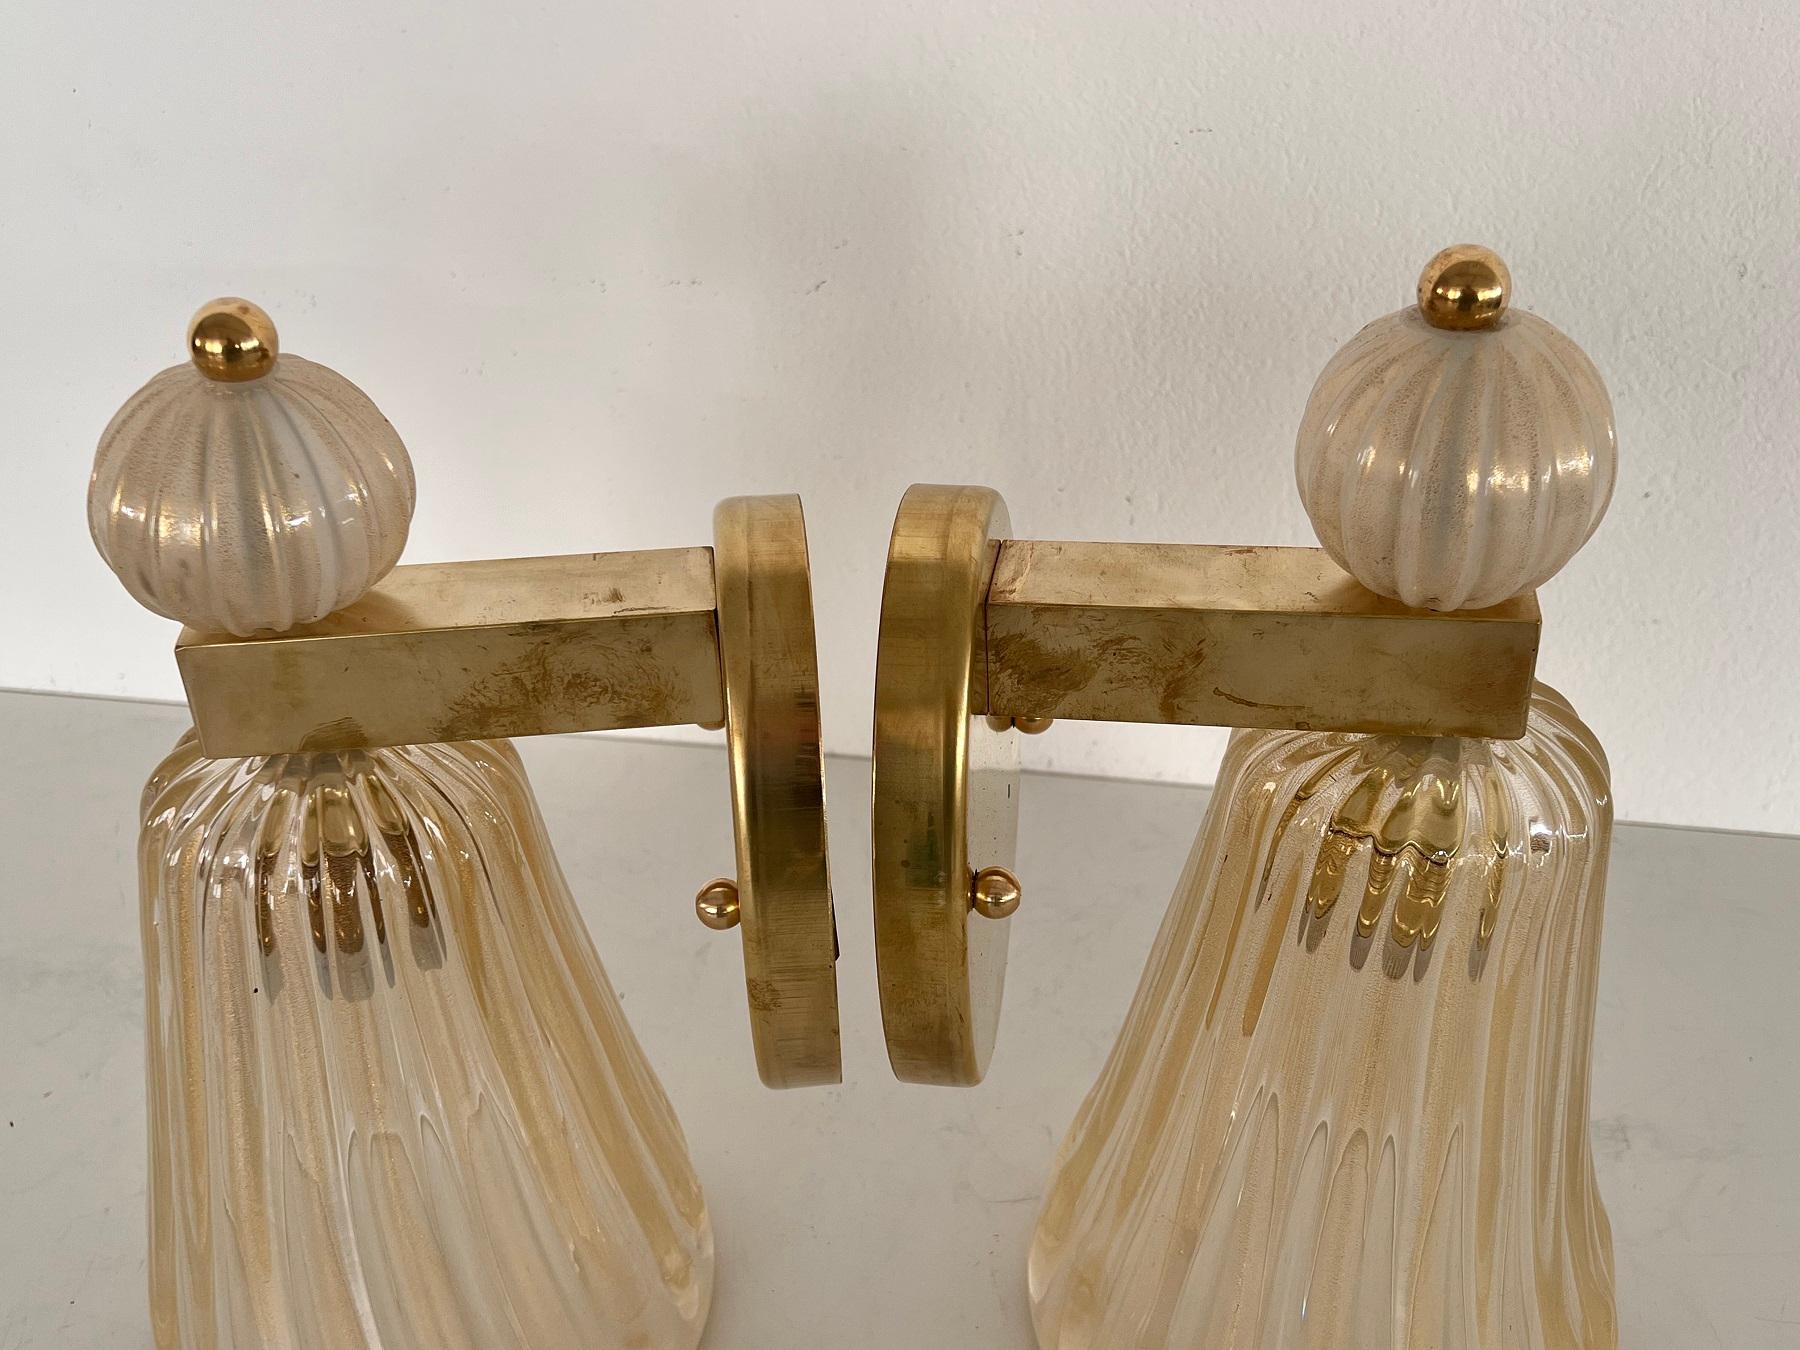 Italian Brass and Murano Glass Wall Lights or Sconces in Art Deco Style, 1990s For Sale 8